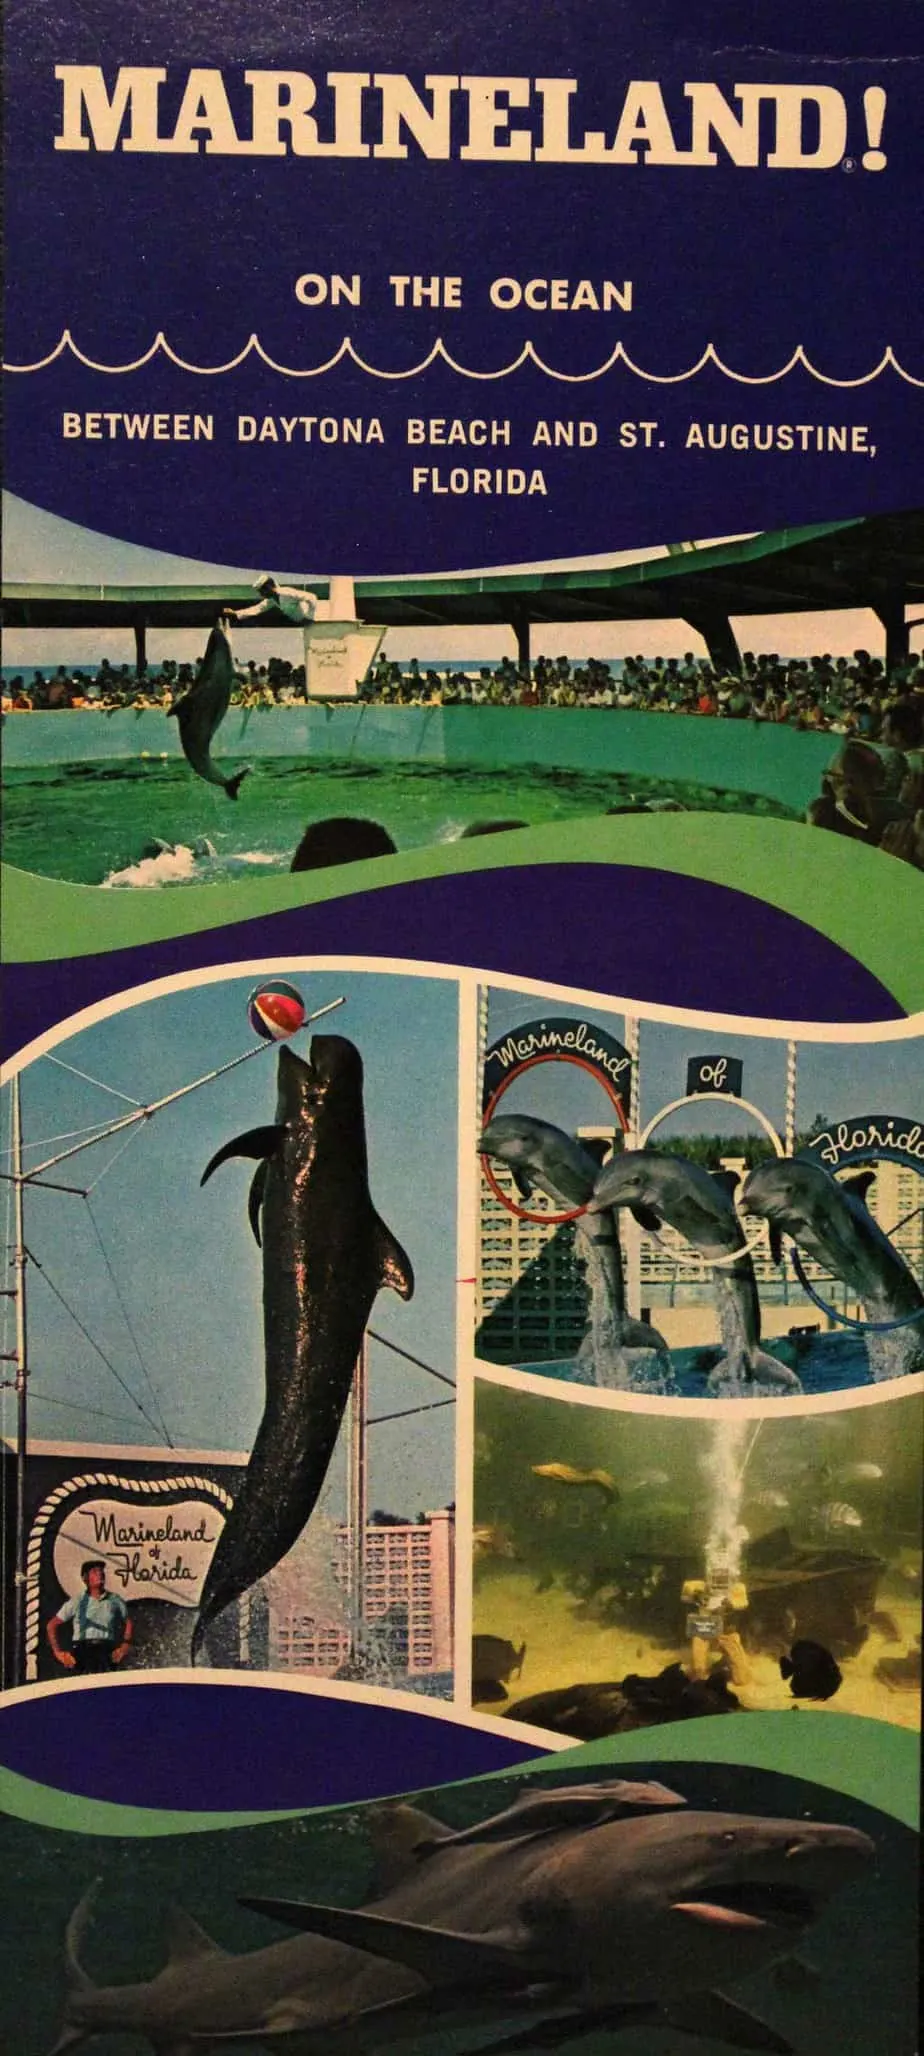 An old brochure from the Marineland Florida attraction during its heyday.